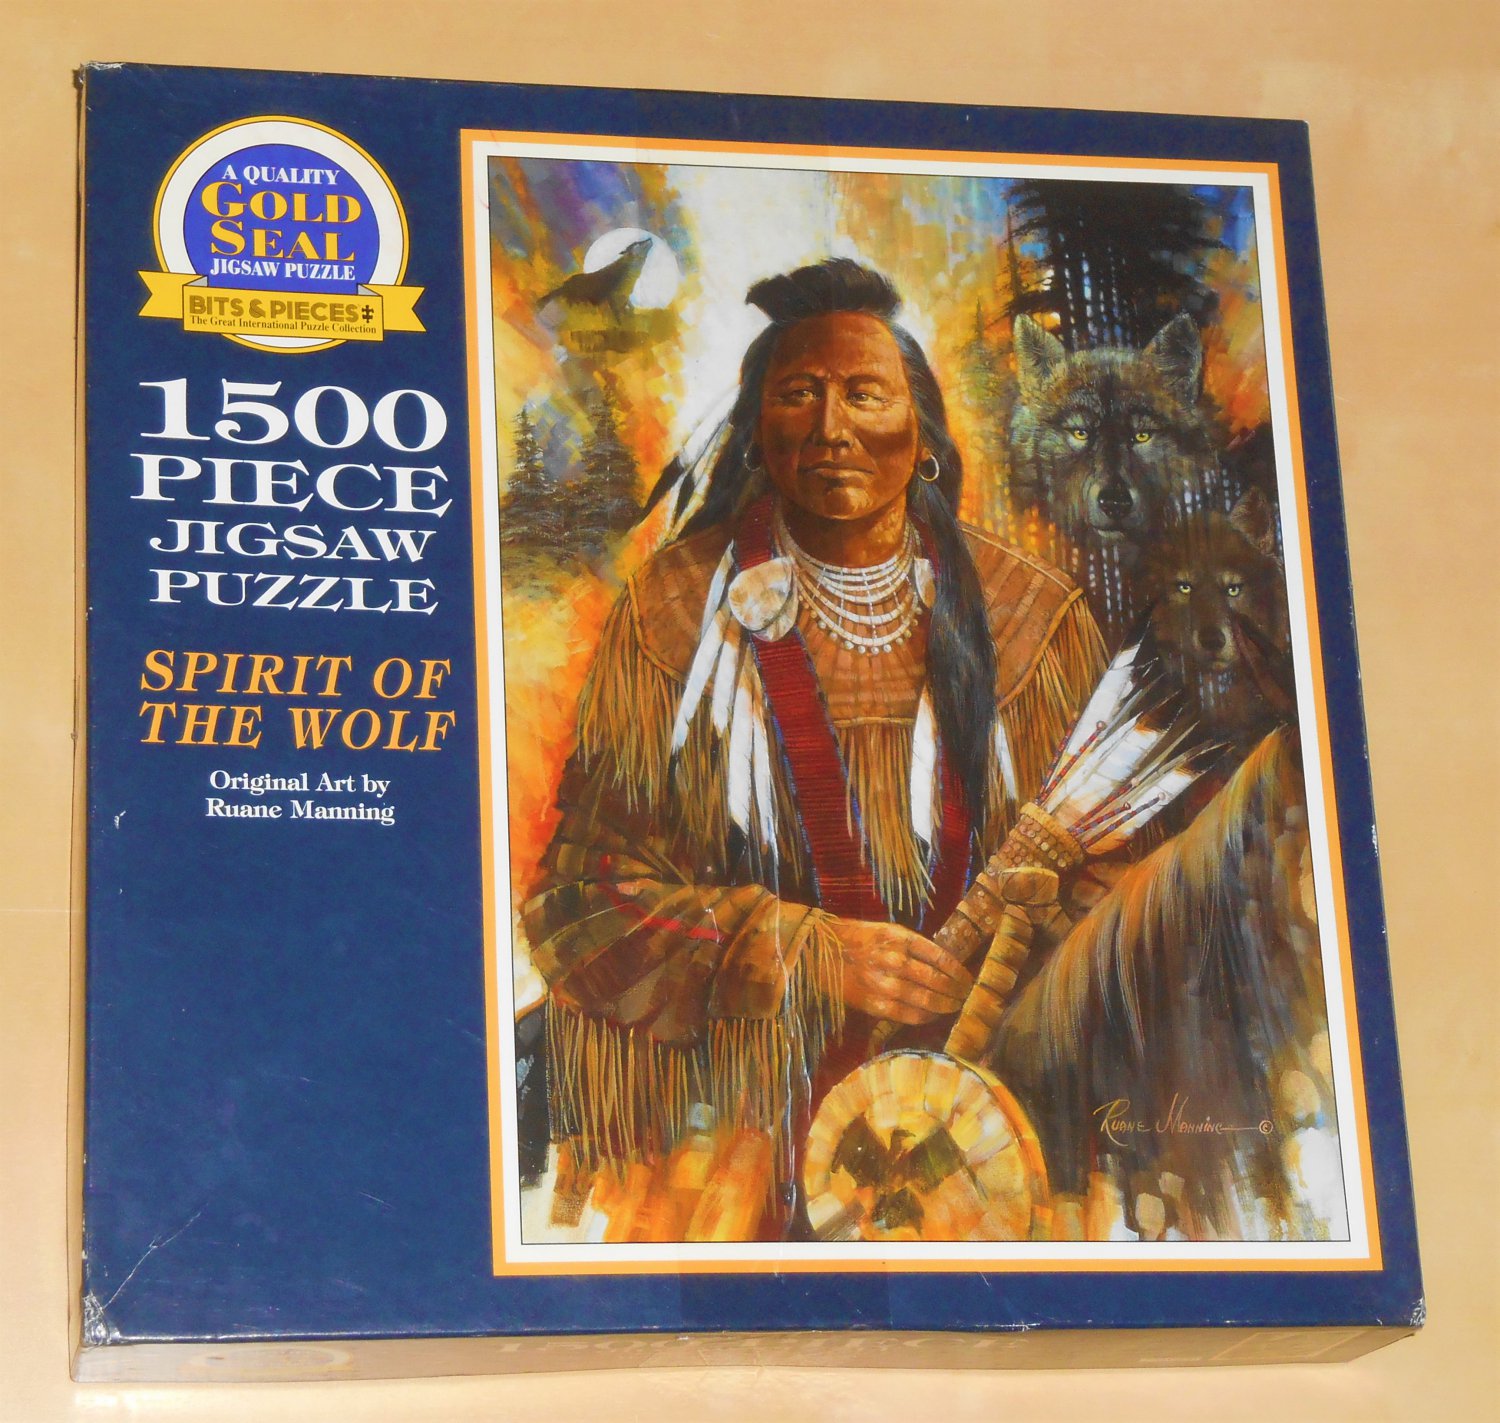 Spirit of the Wolf 1500 Piece Jigsaw Puzzle Bits & Pieces 03-0260 Ruane Manning COMPLETE